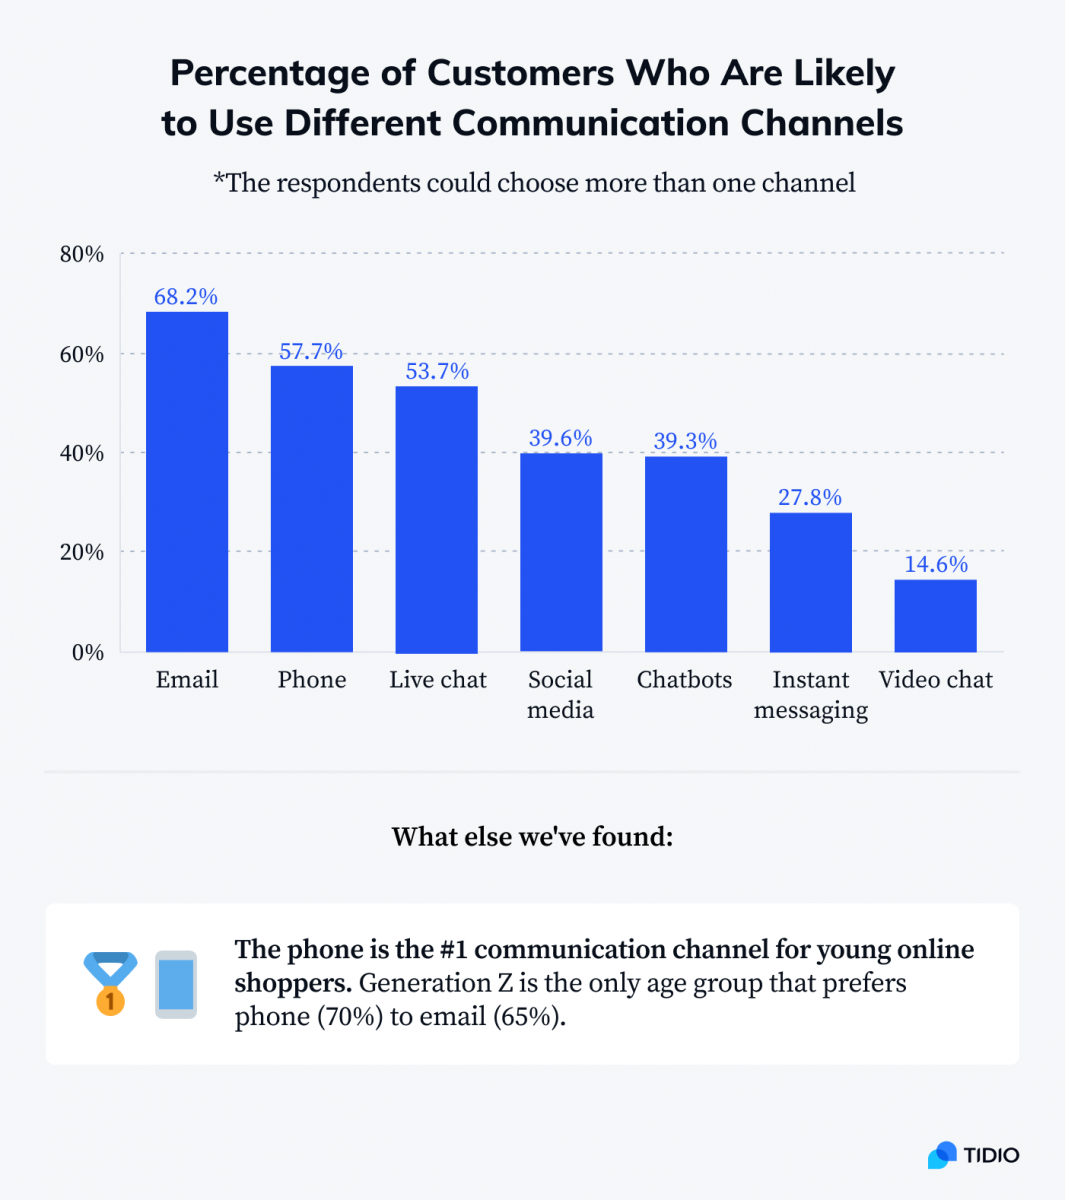 Percentage of customers who are likely to use different communication channels